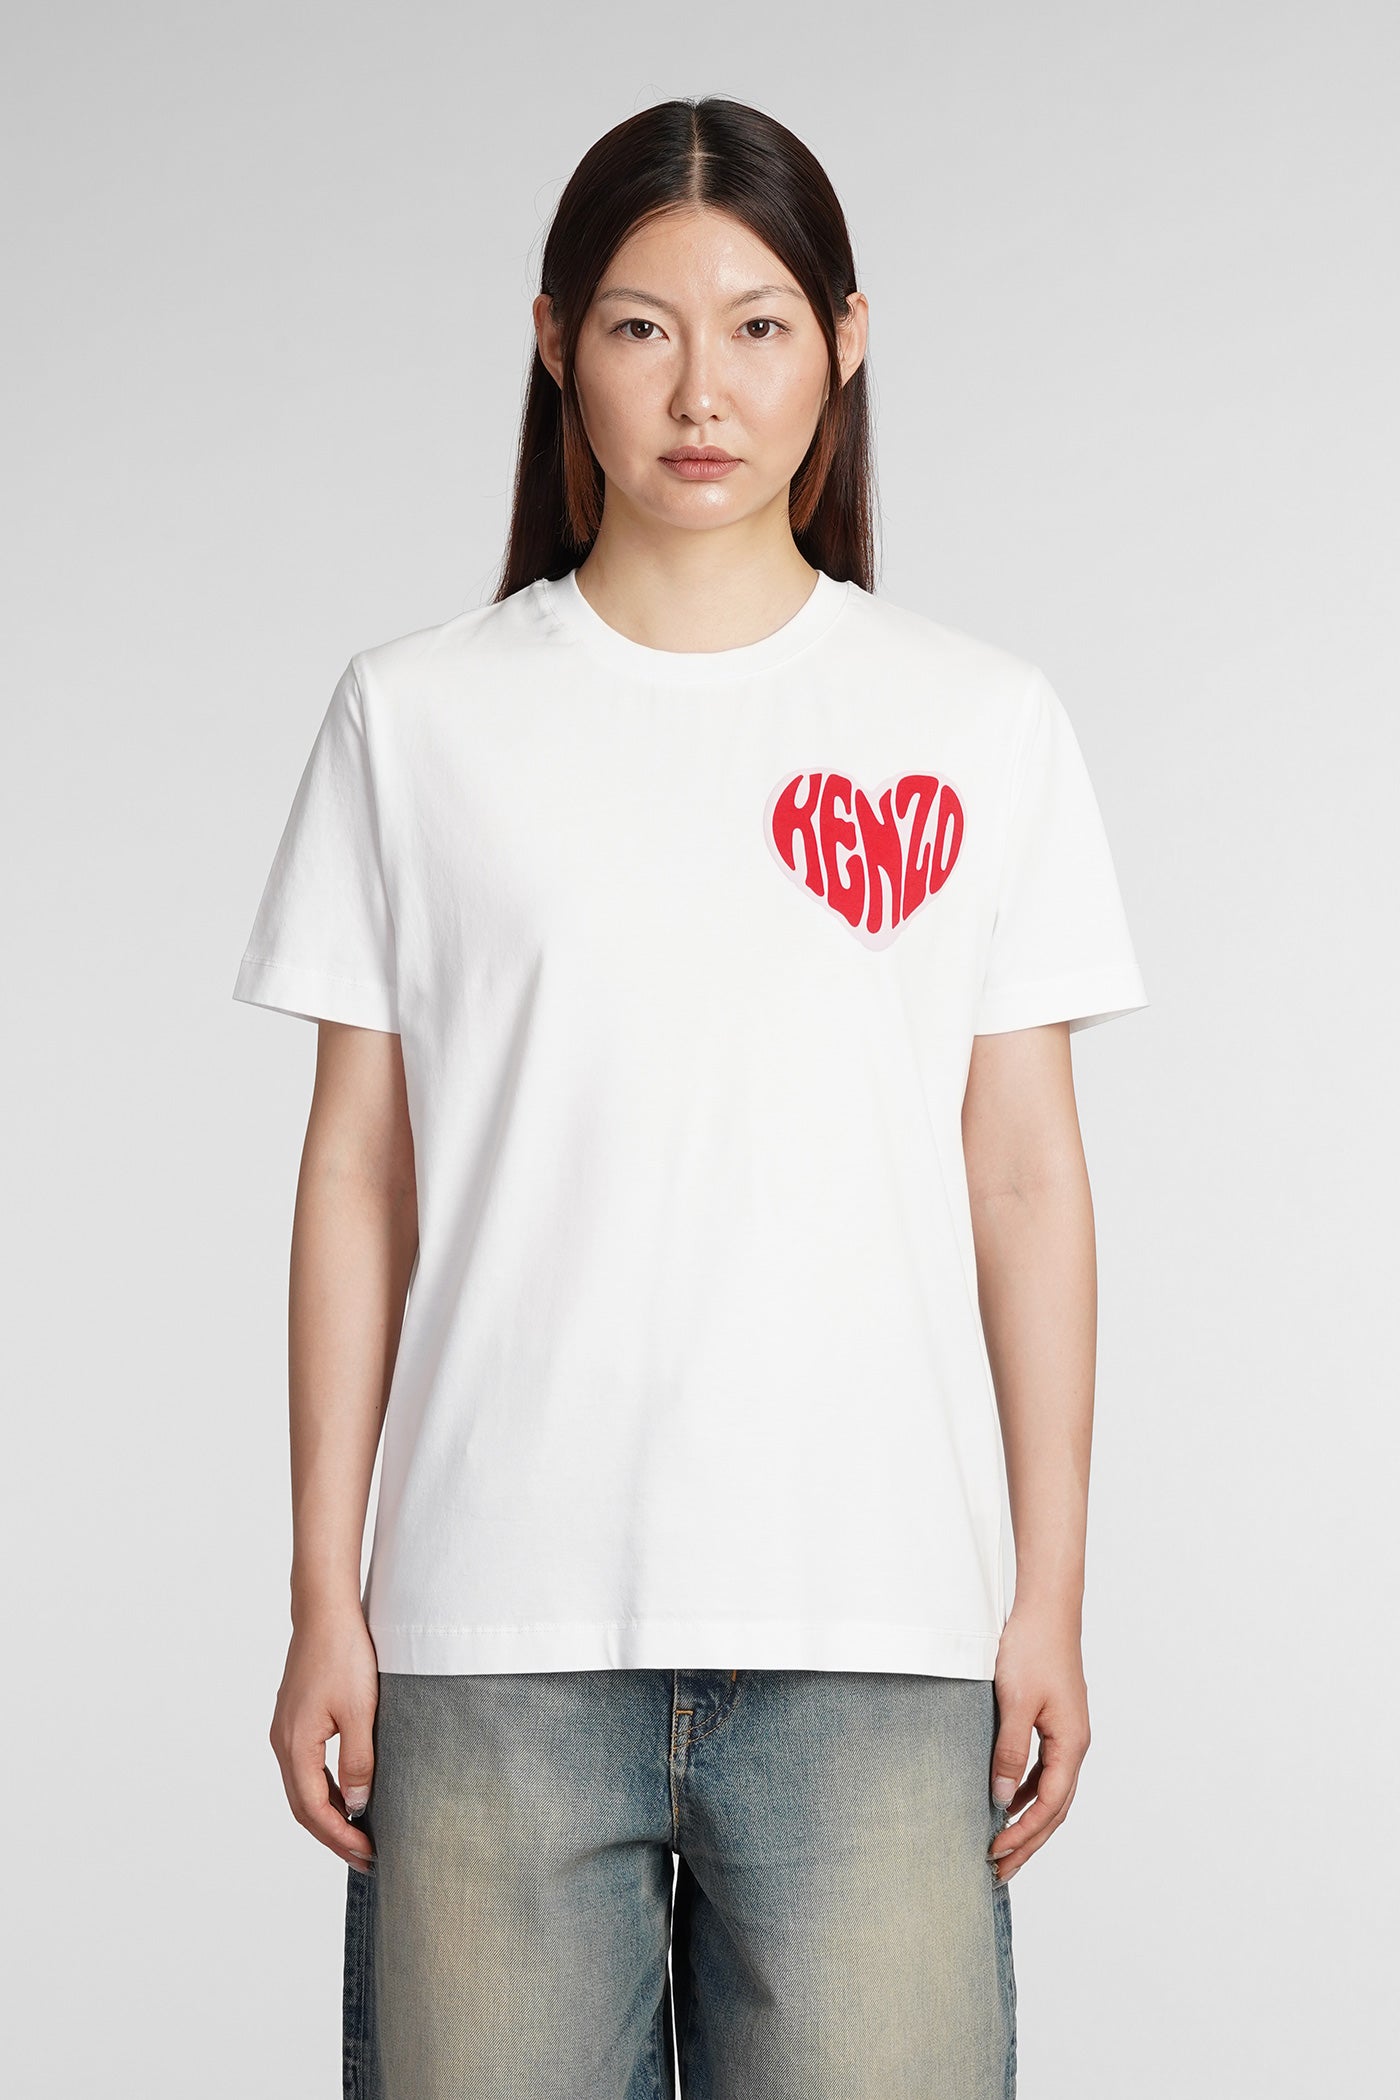 T-Shirt in white cotton